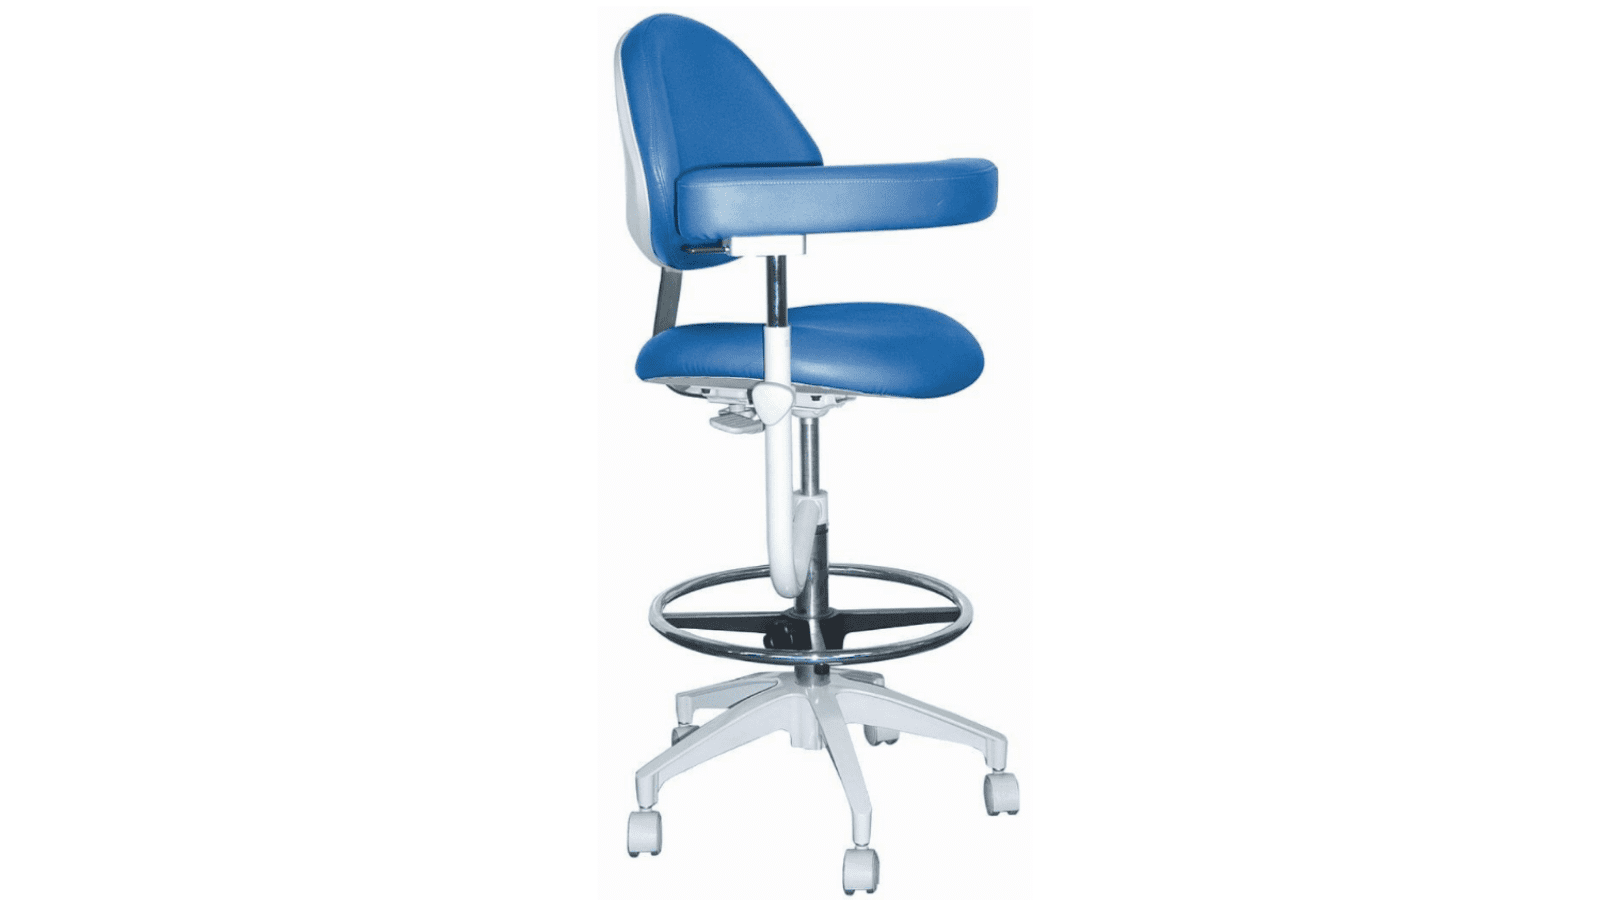 Mirage assistant stool model as 1101 by tpc